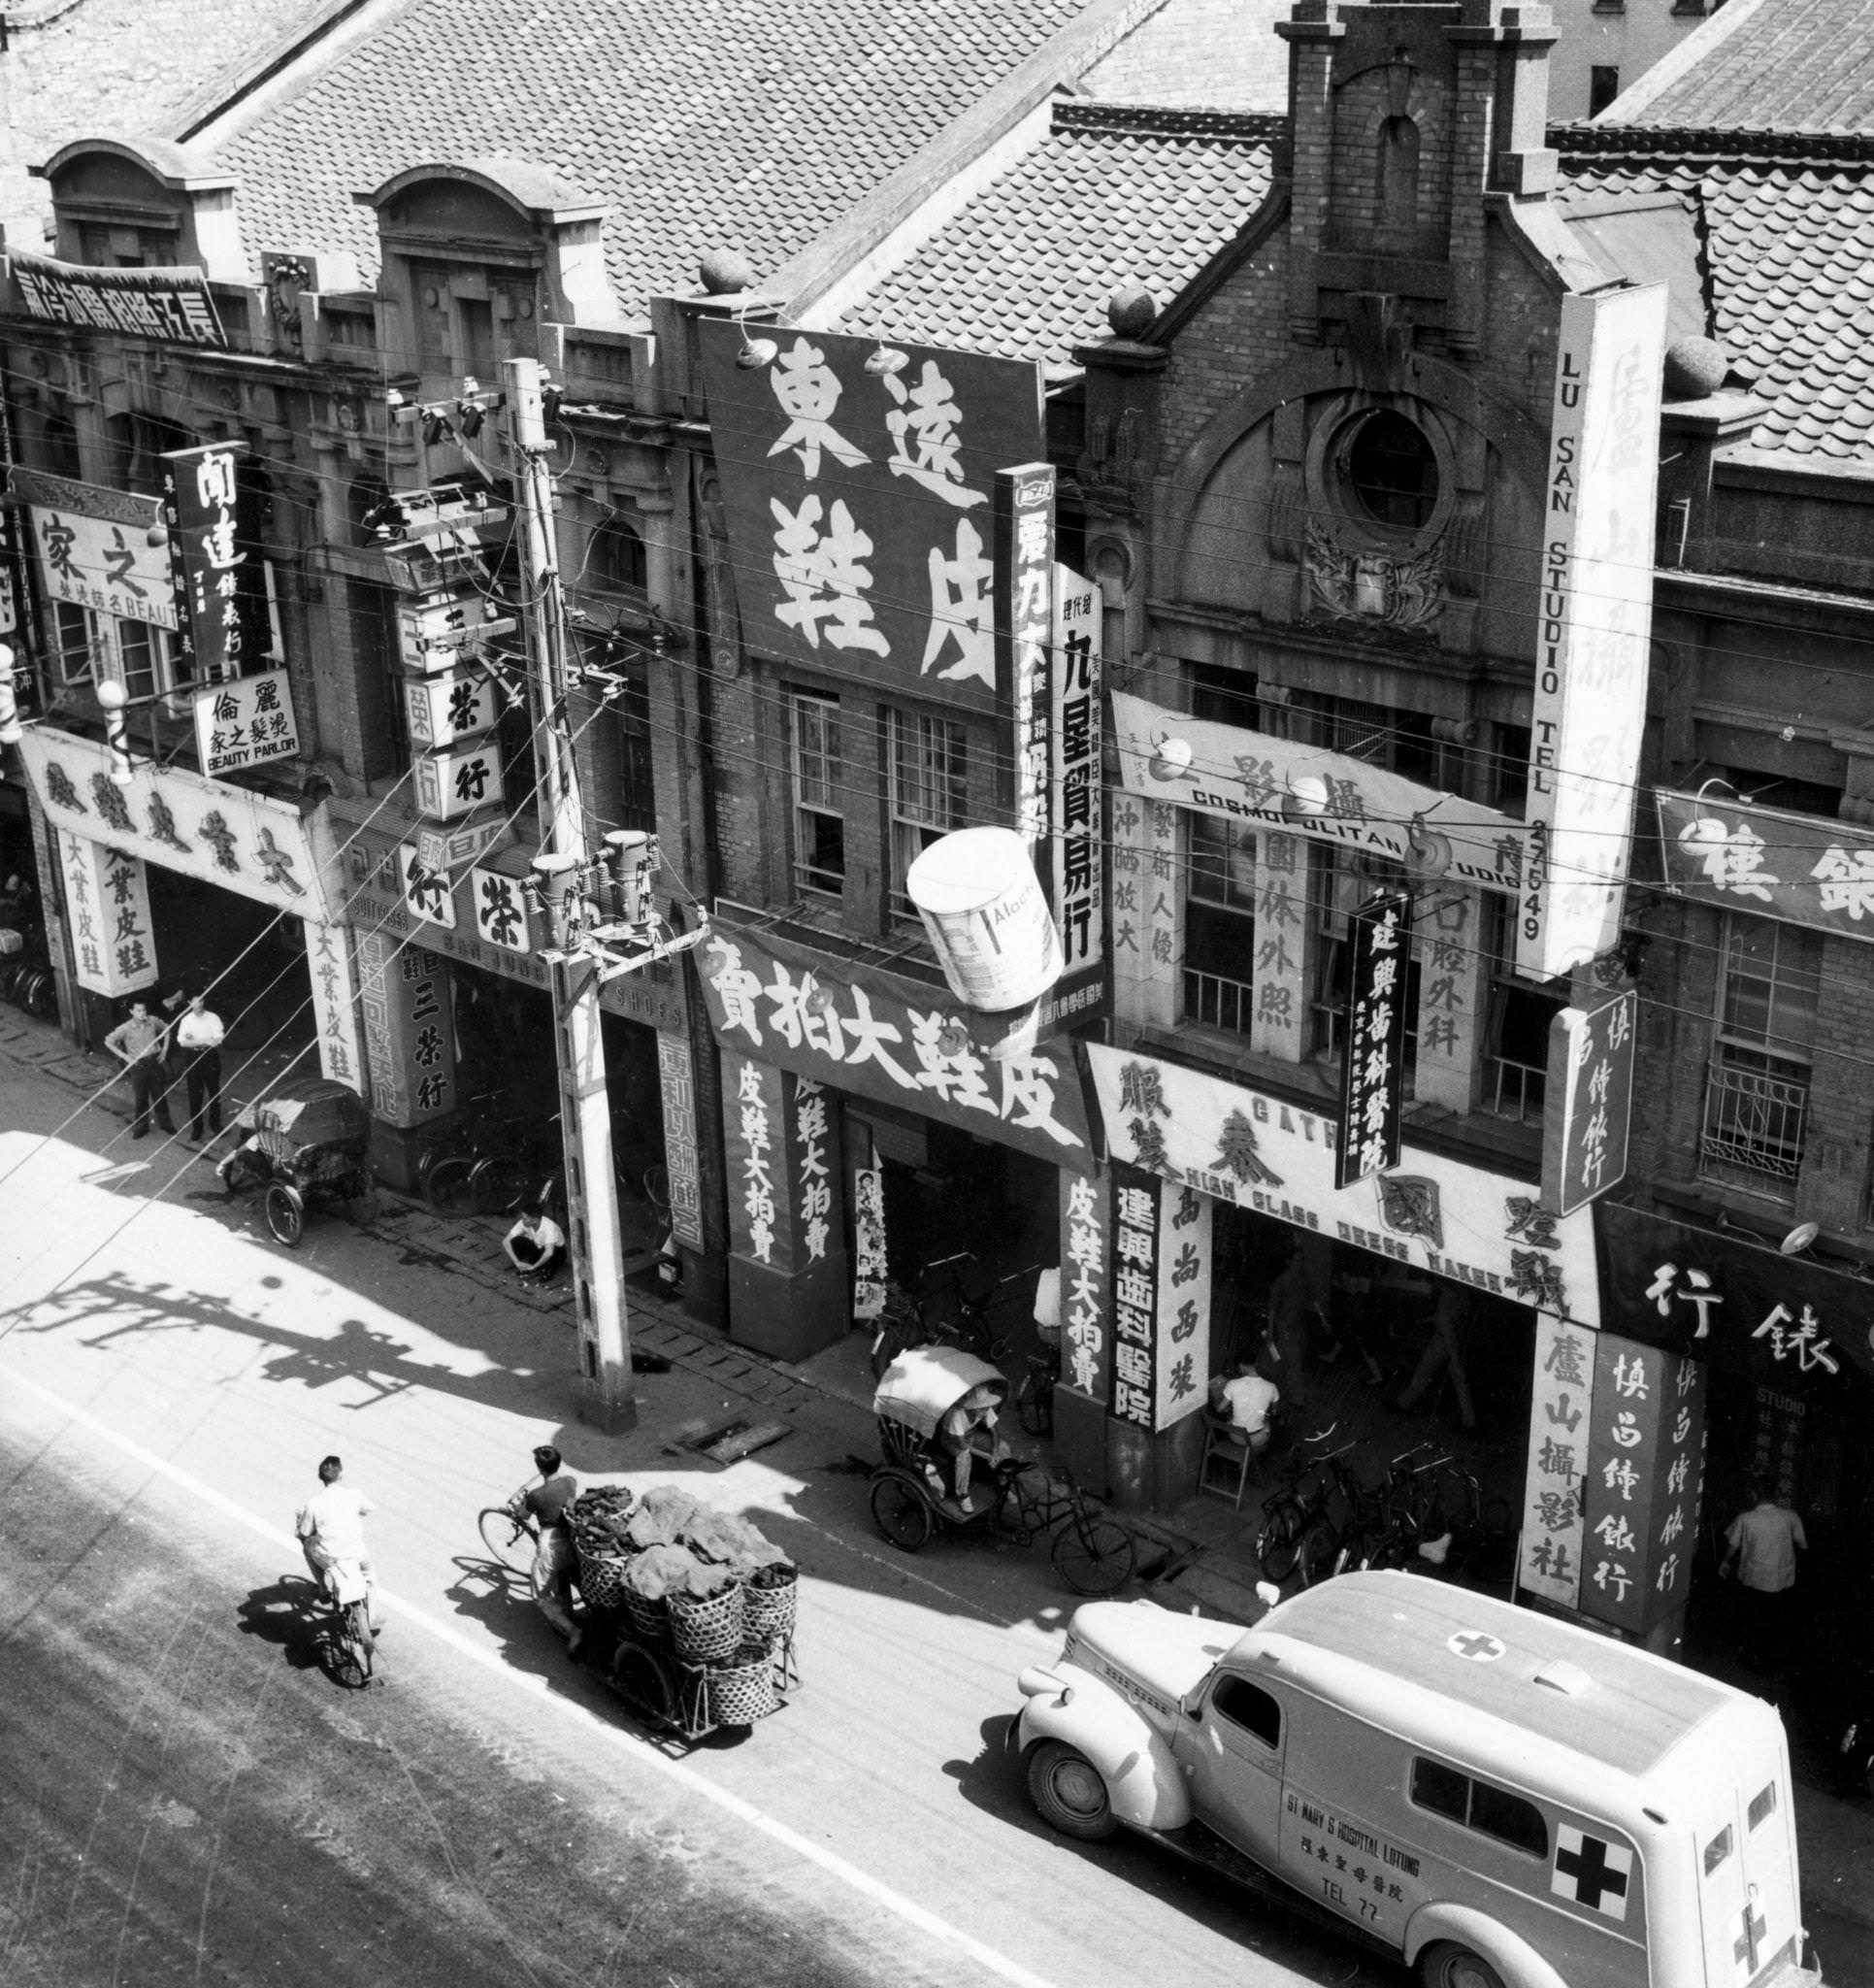 Buildings covered with banners written in Chinese characters at Chung Hwa Road, Taipei, Taiwan, 1955